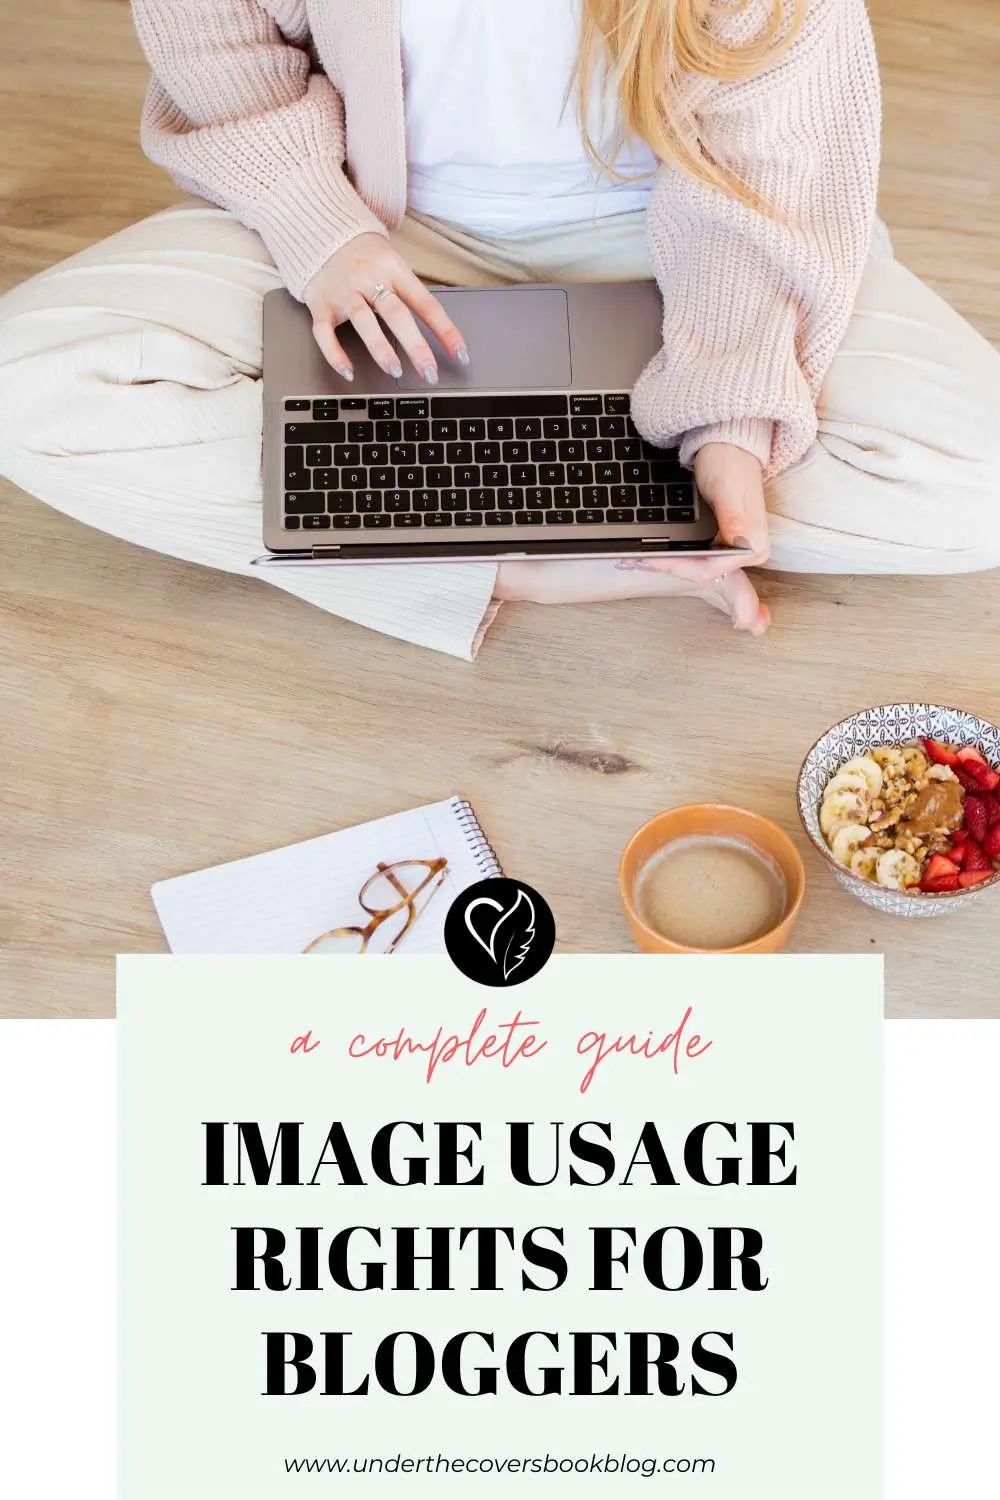 Image Usage Rights: How to Legally Use Images on your Blog